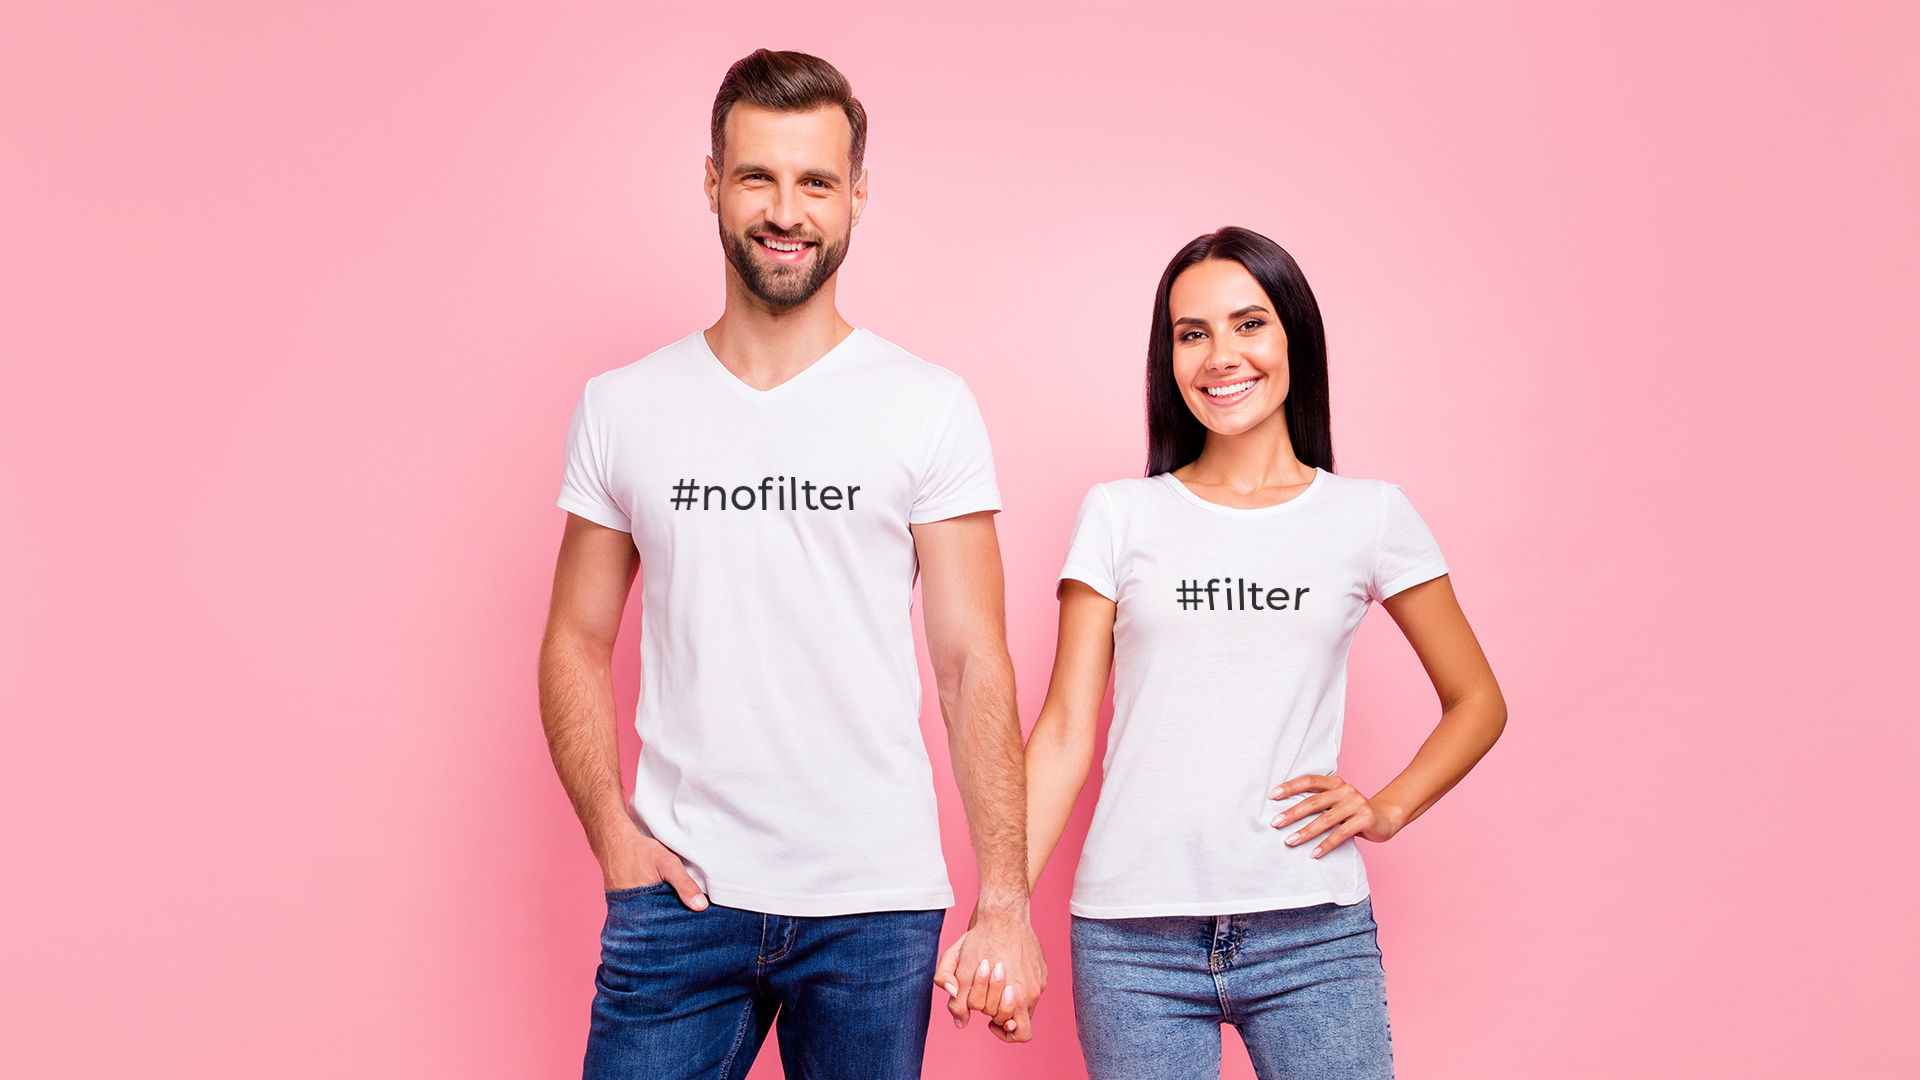 Man and woman dressed in identical clothes, impersonating filtered and non-filtered Instagram pictures.